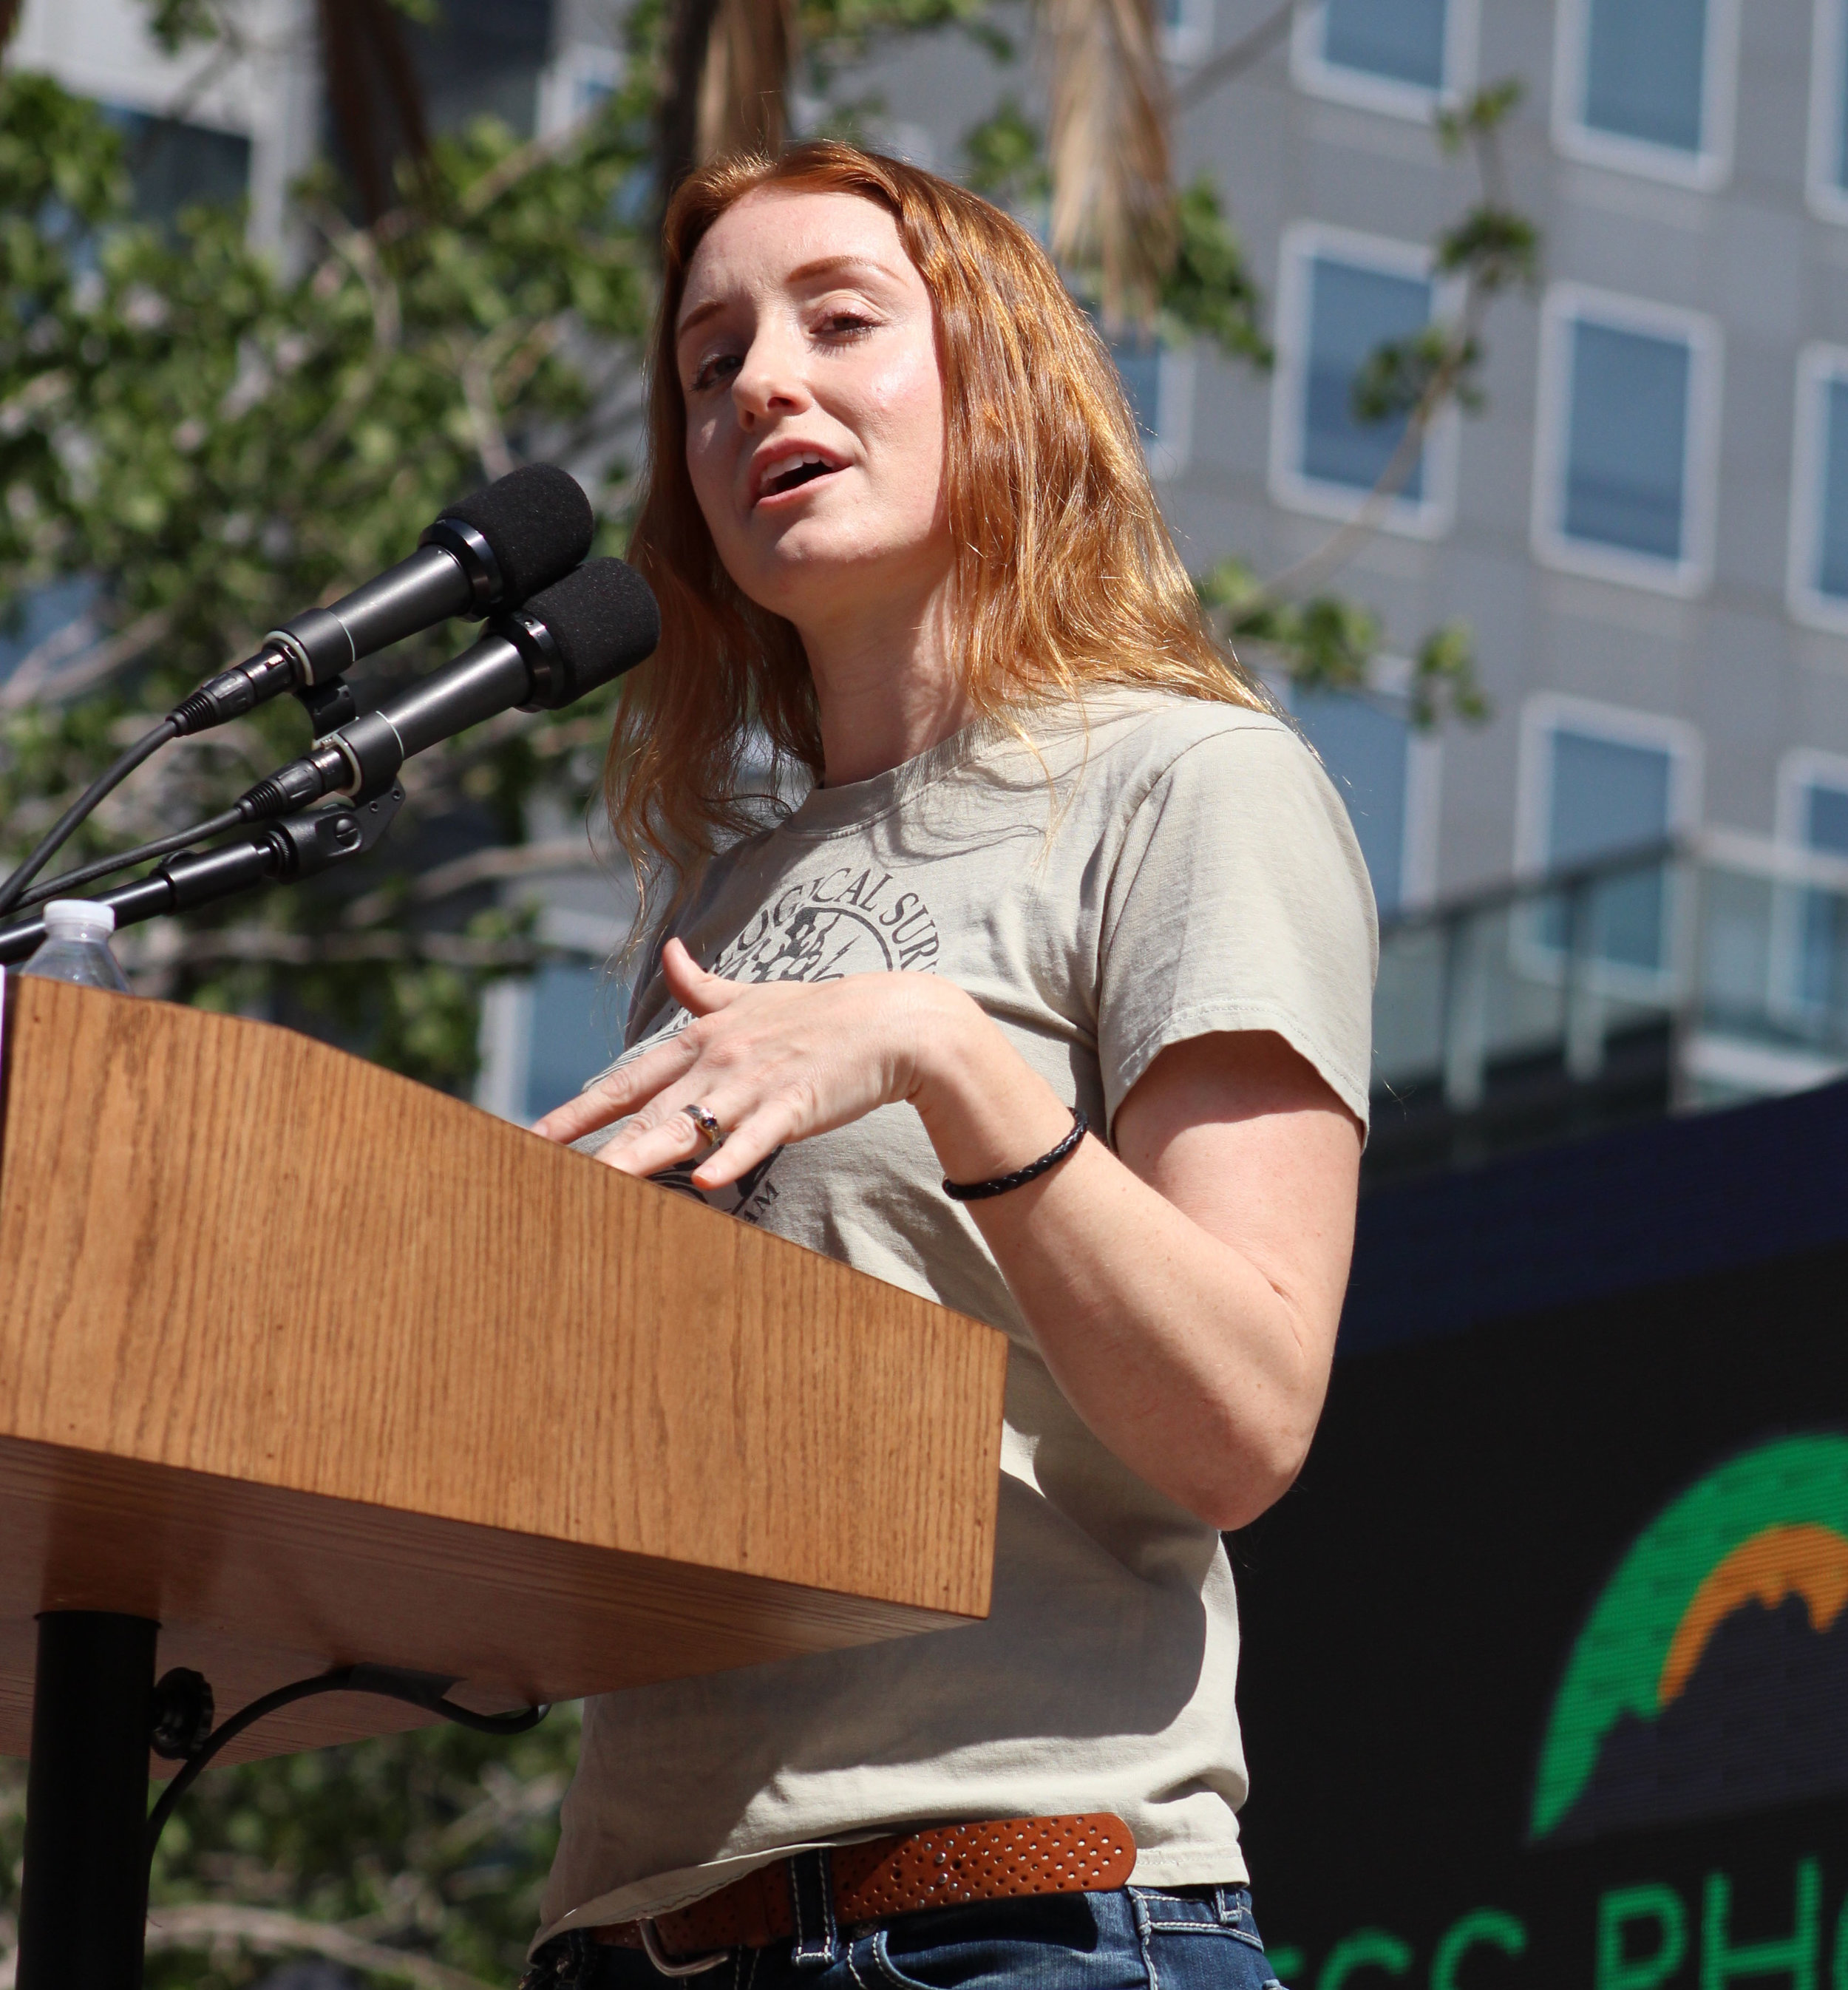  Jess Pheonix, volcanologist, geologist, and executive director/co-founder of nonprofit environmental  research organization Blueprint Earth, discusses how “anyone can be a scientist,” at  the LA March for Science in Pershing Square, Los Angeles, Cal